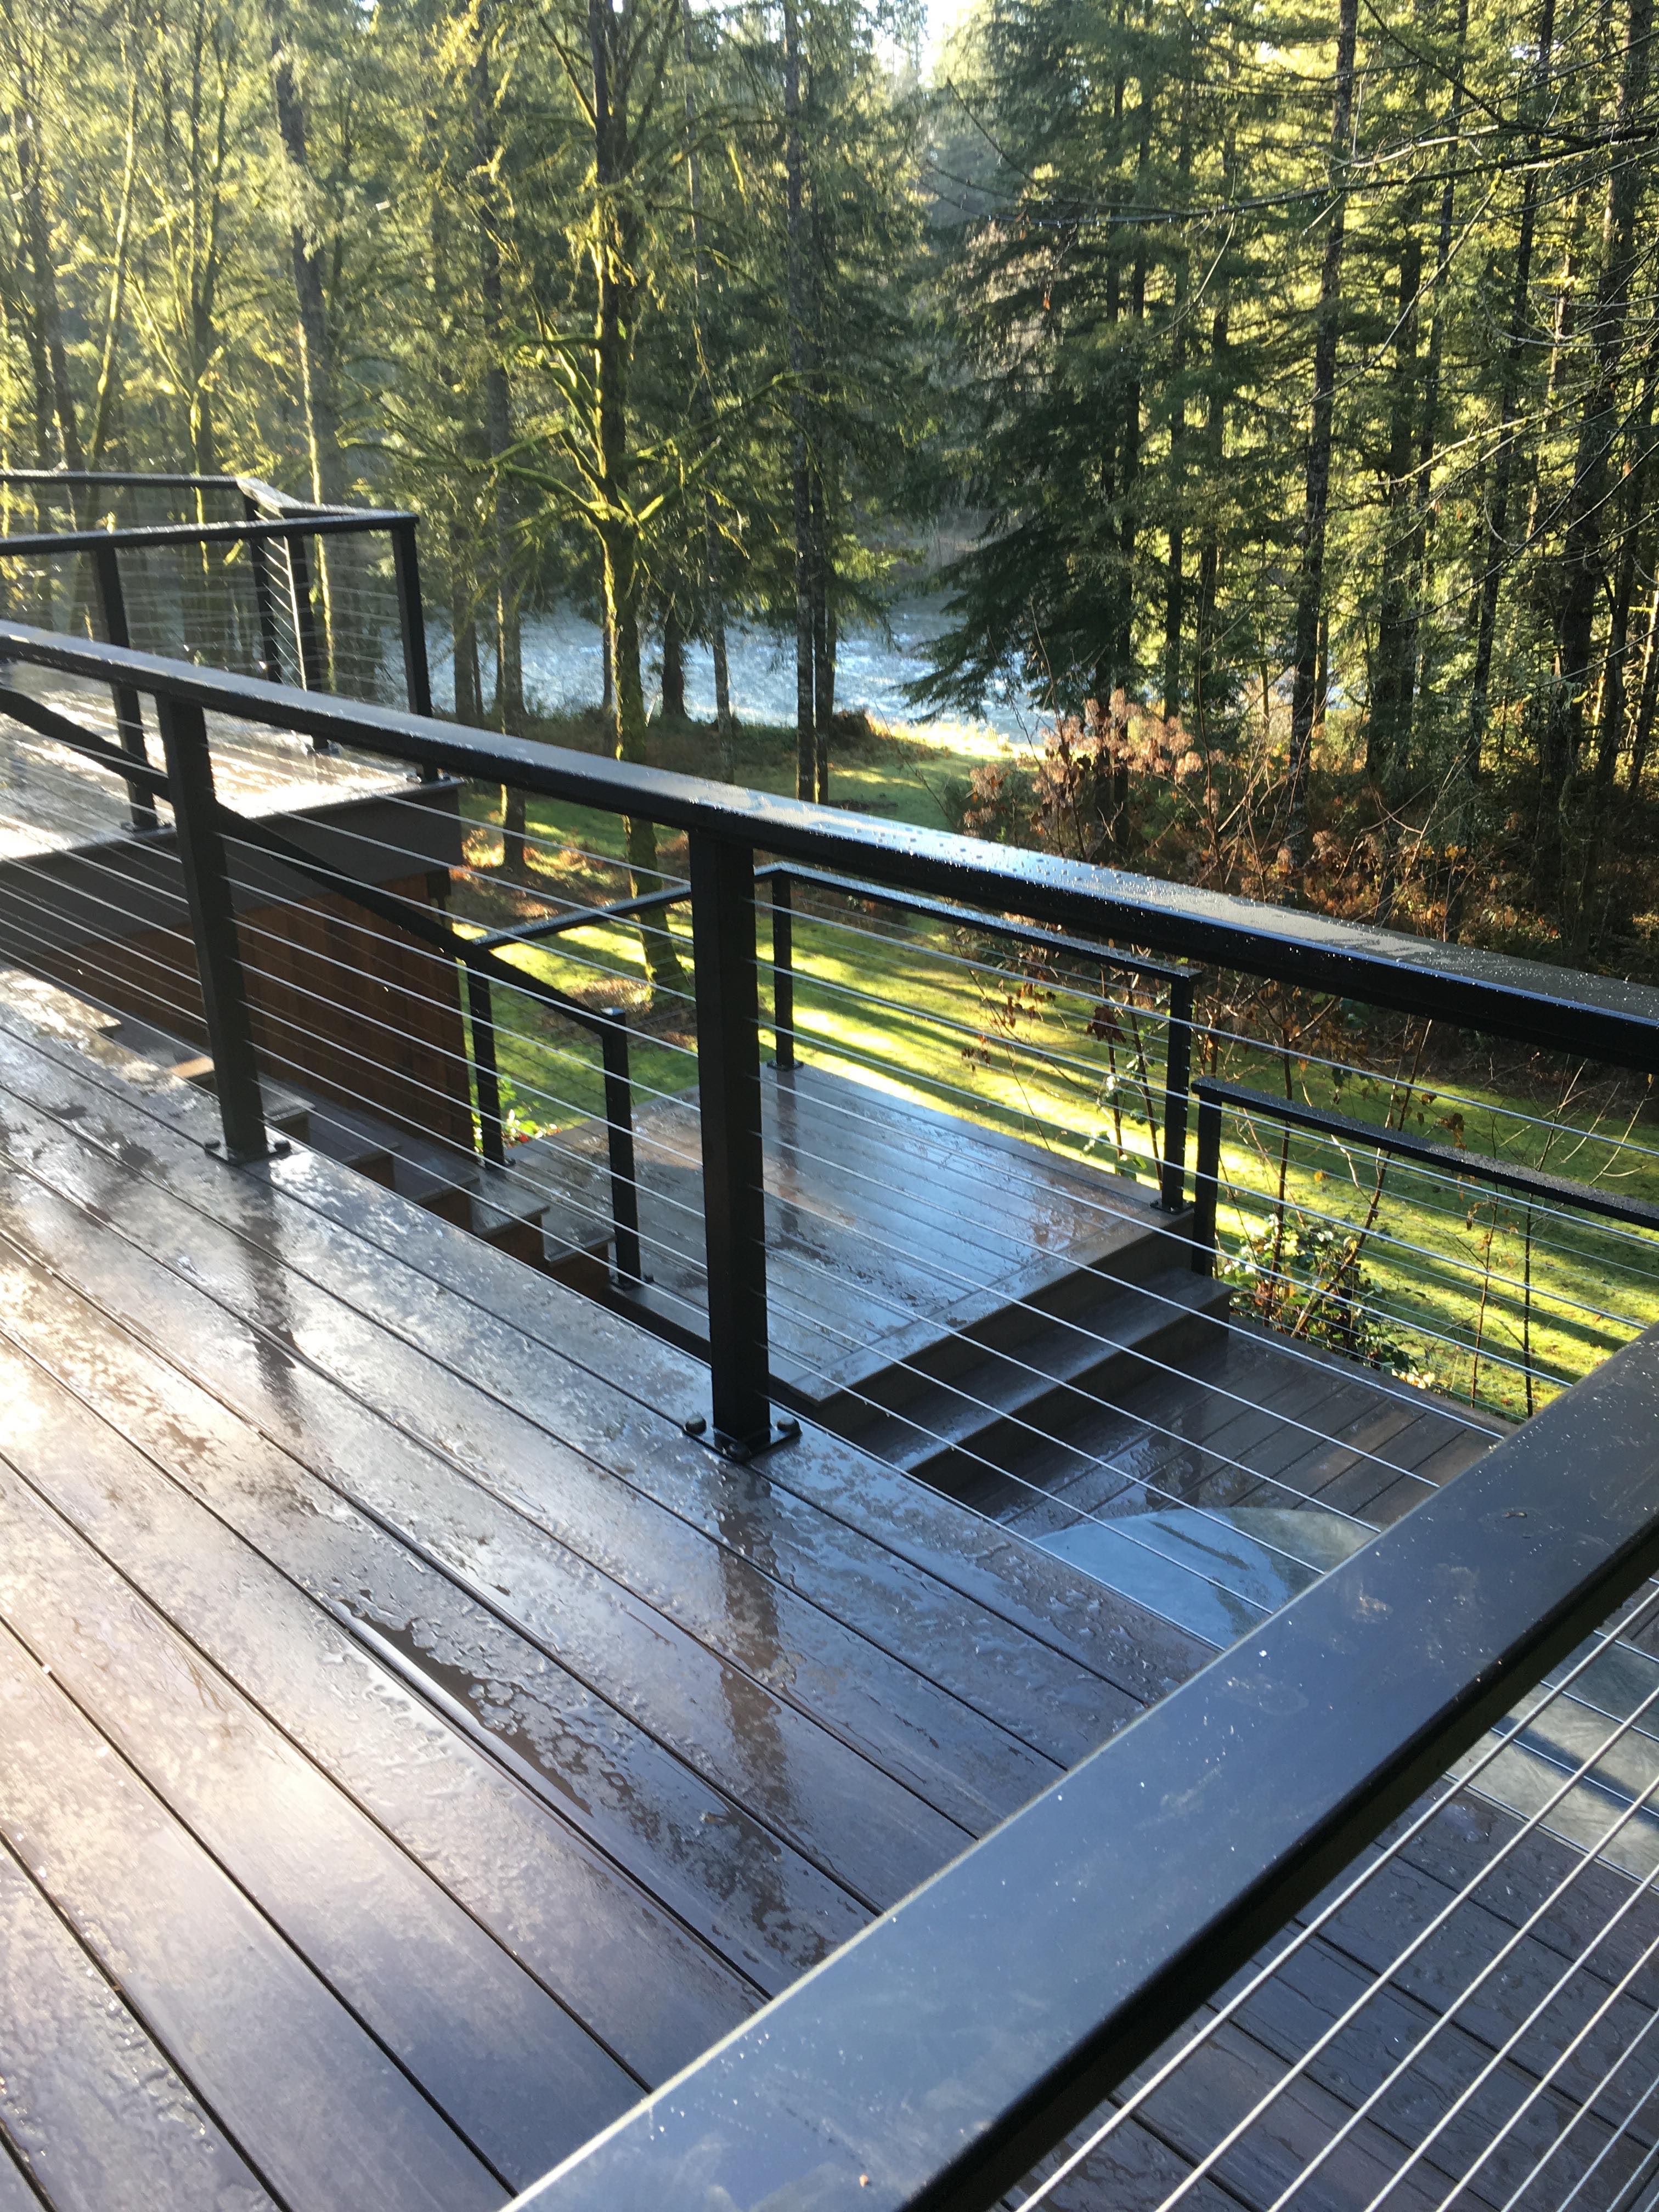 Trex Composite decking and Alumarail railings with cable